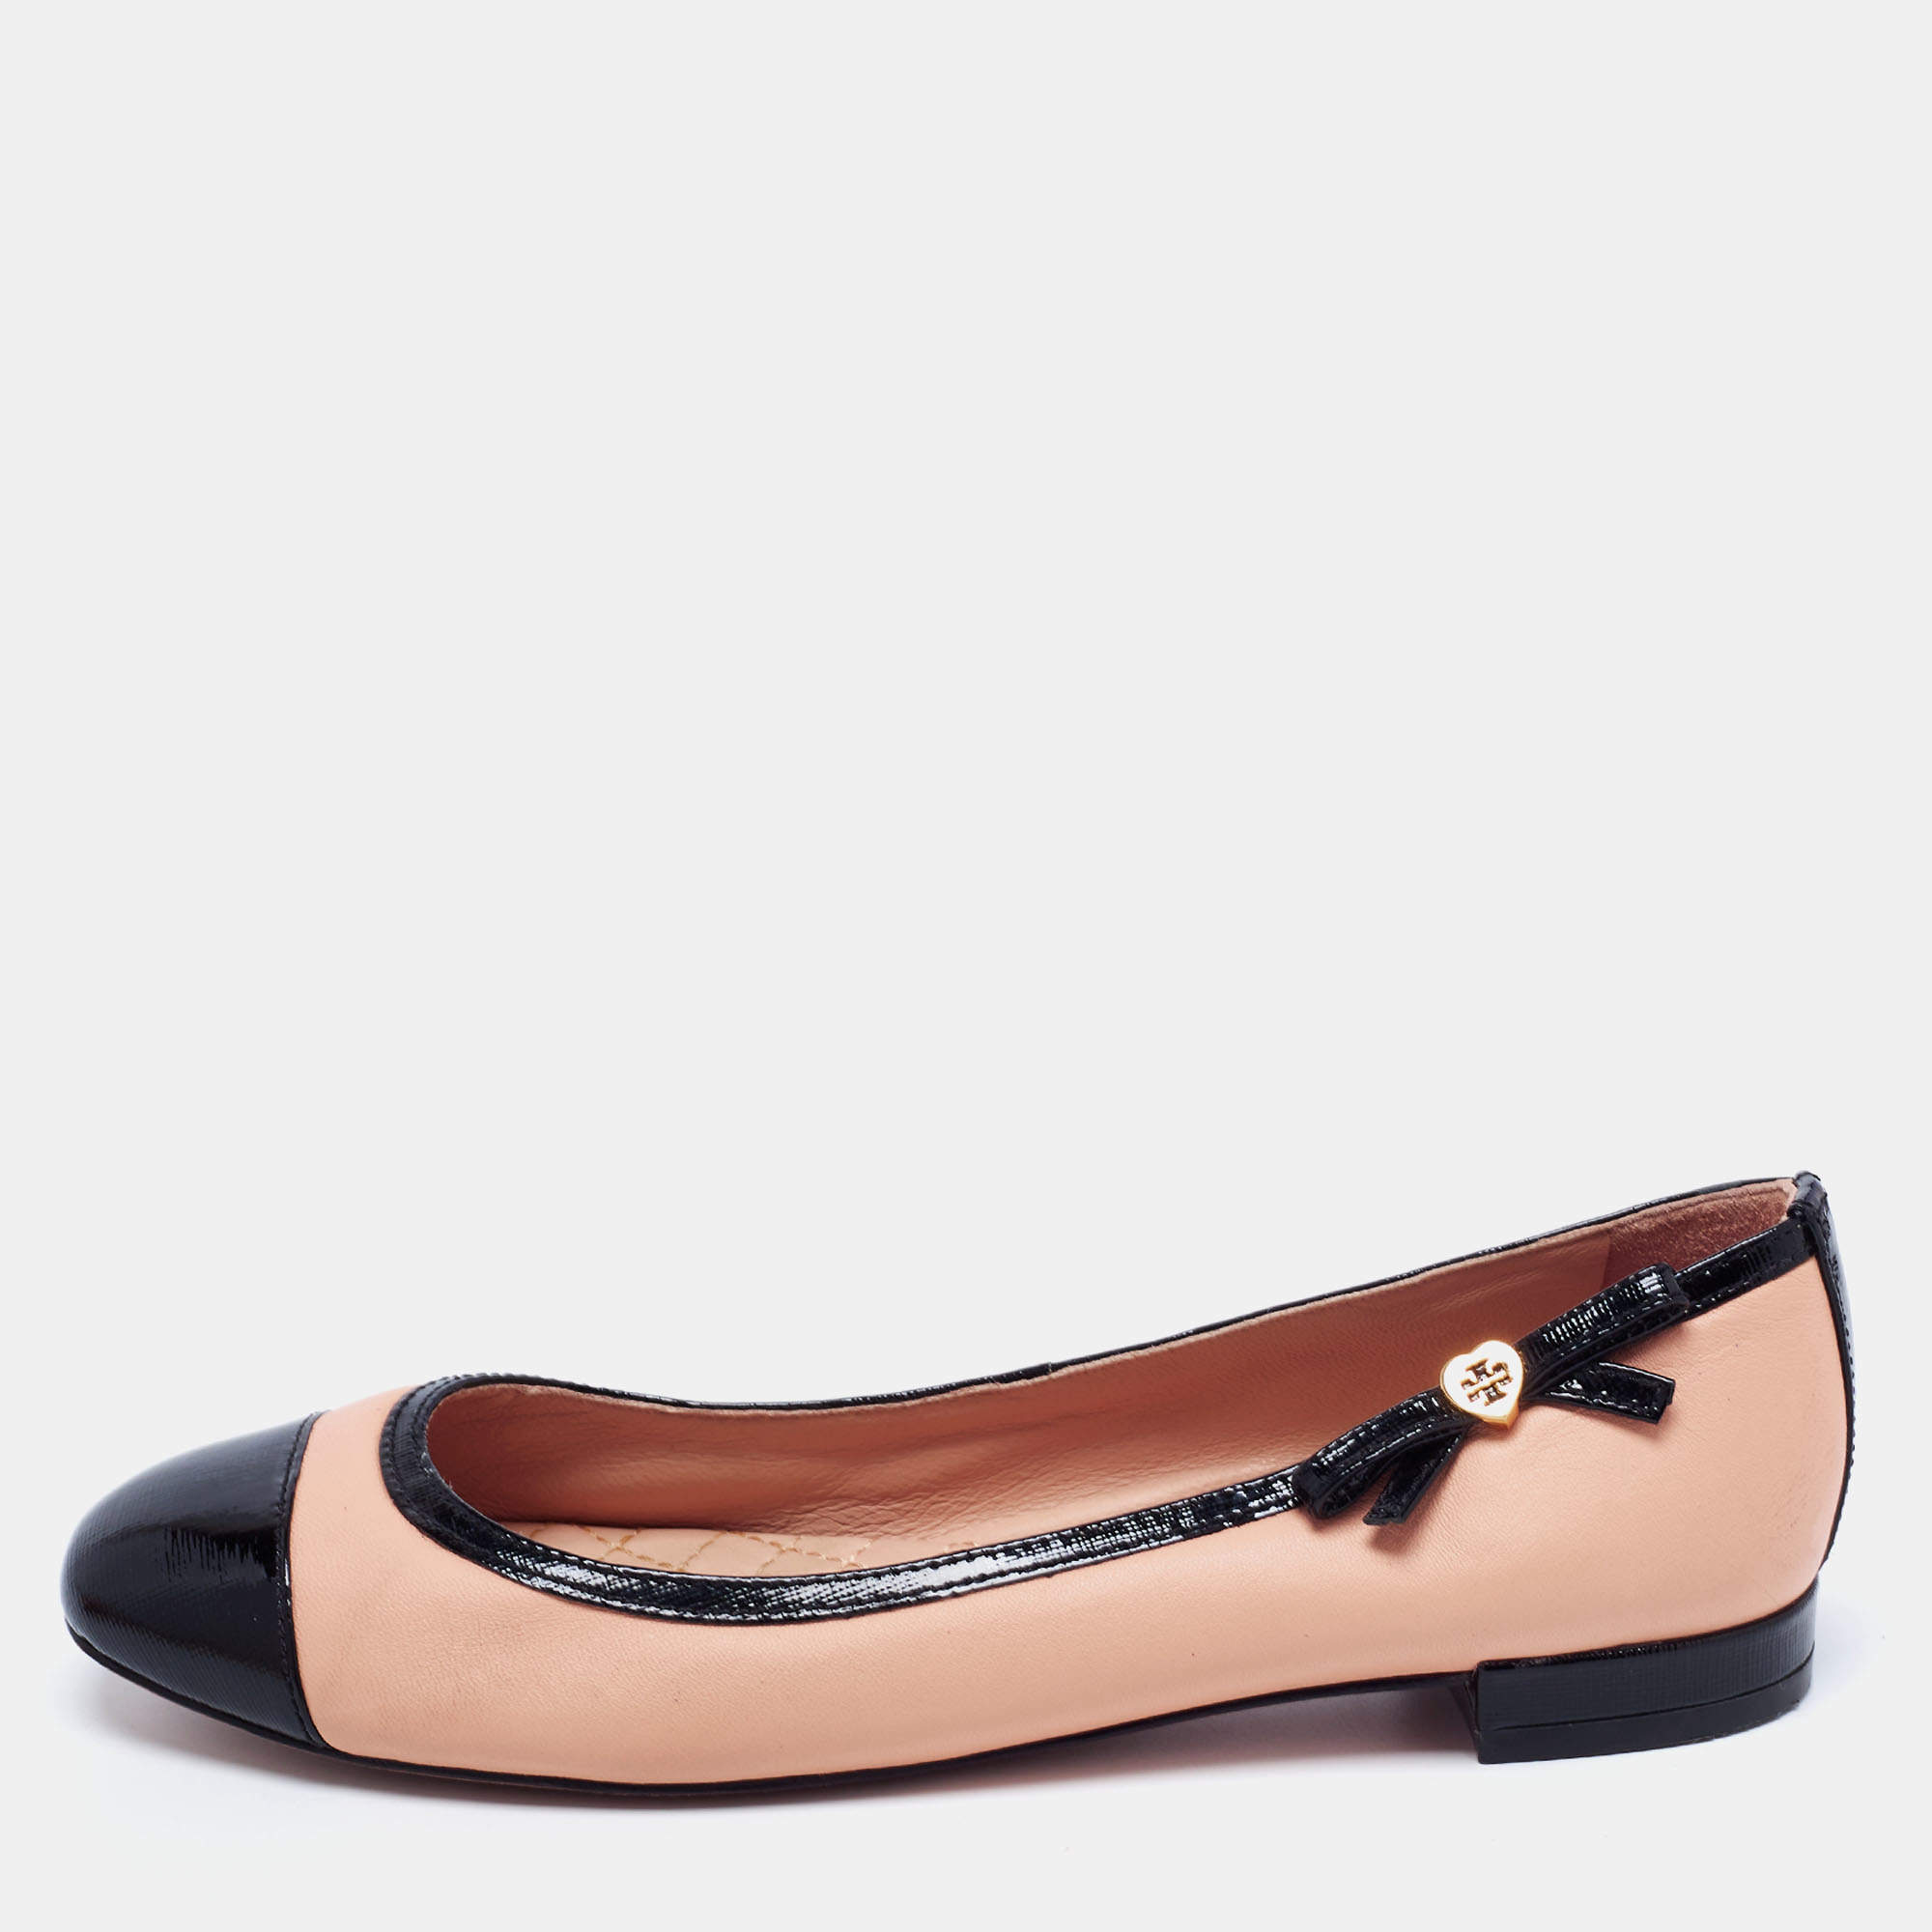 Tory Burch Beige/Black Leather and Patent Ballet Flats Size  Tory Burch  | TLC